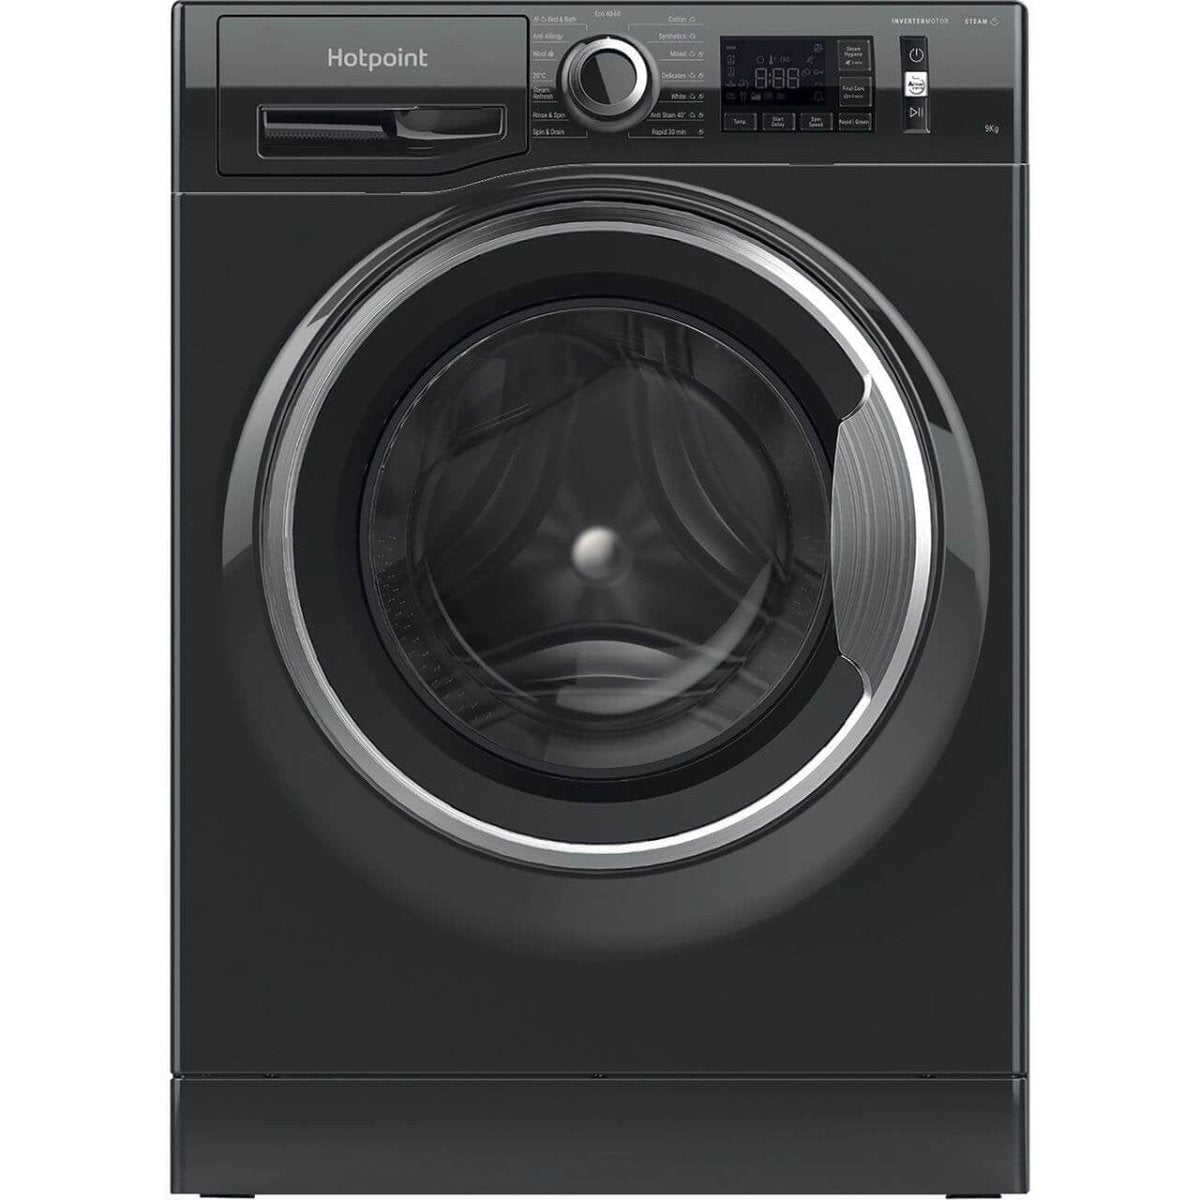 Hotpoint NM11945BCAUKN 9Kg Washing Machine with 1400 rpm - Black - A+++ Rated - Atlantic Electrics